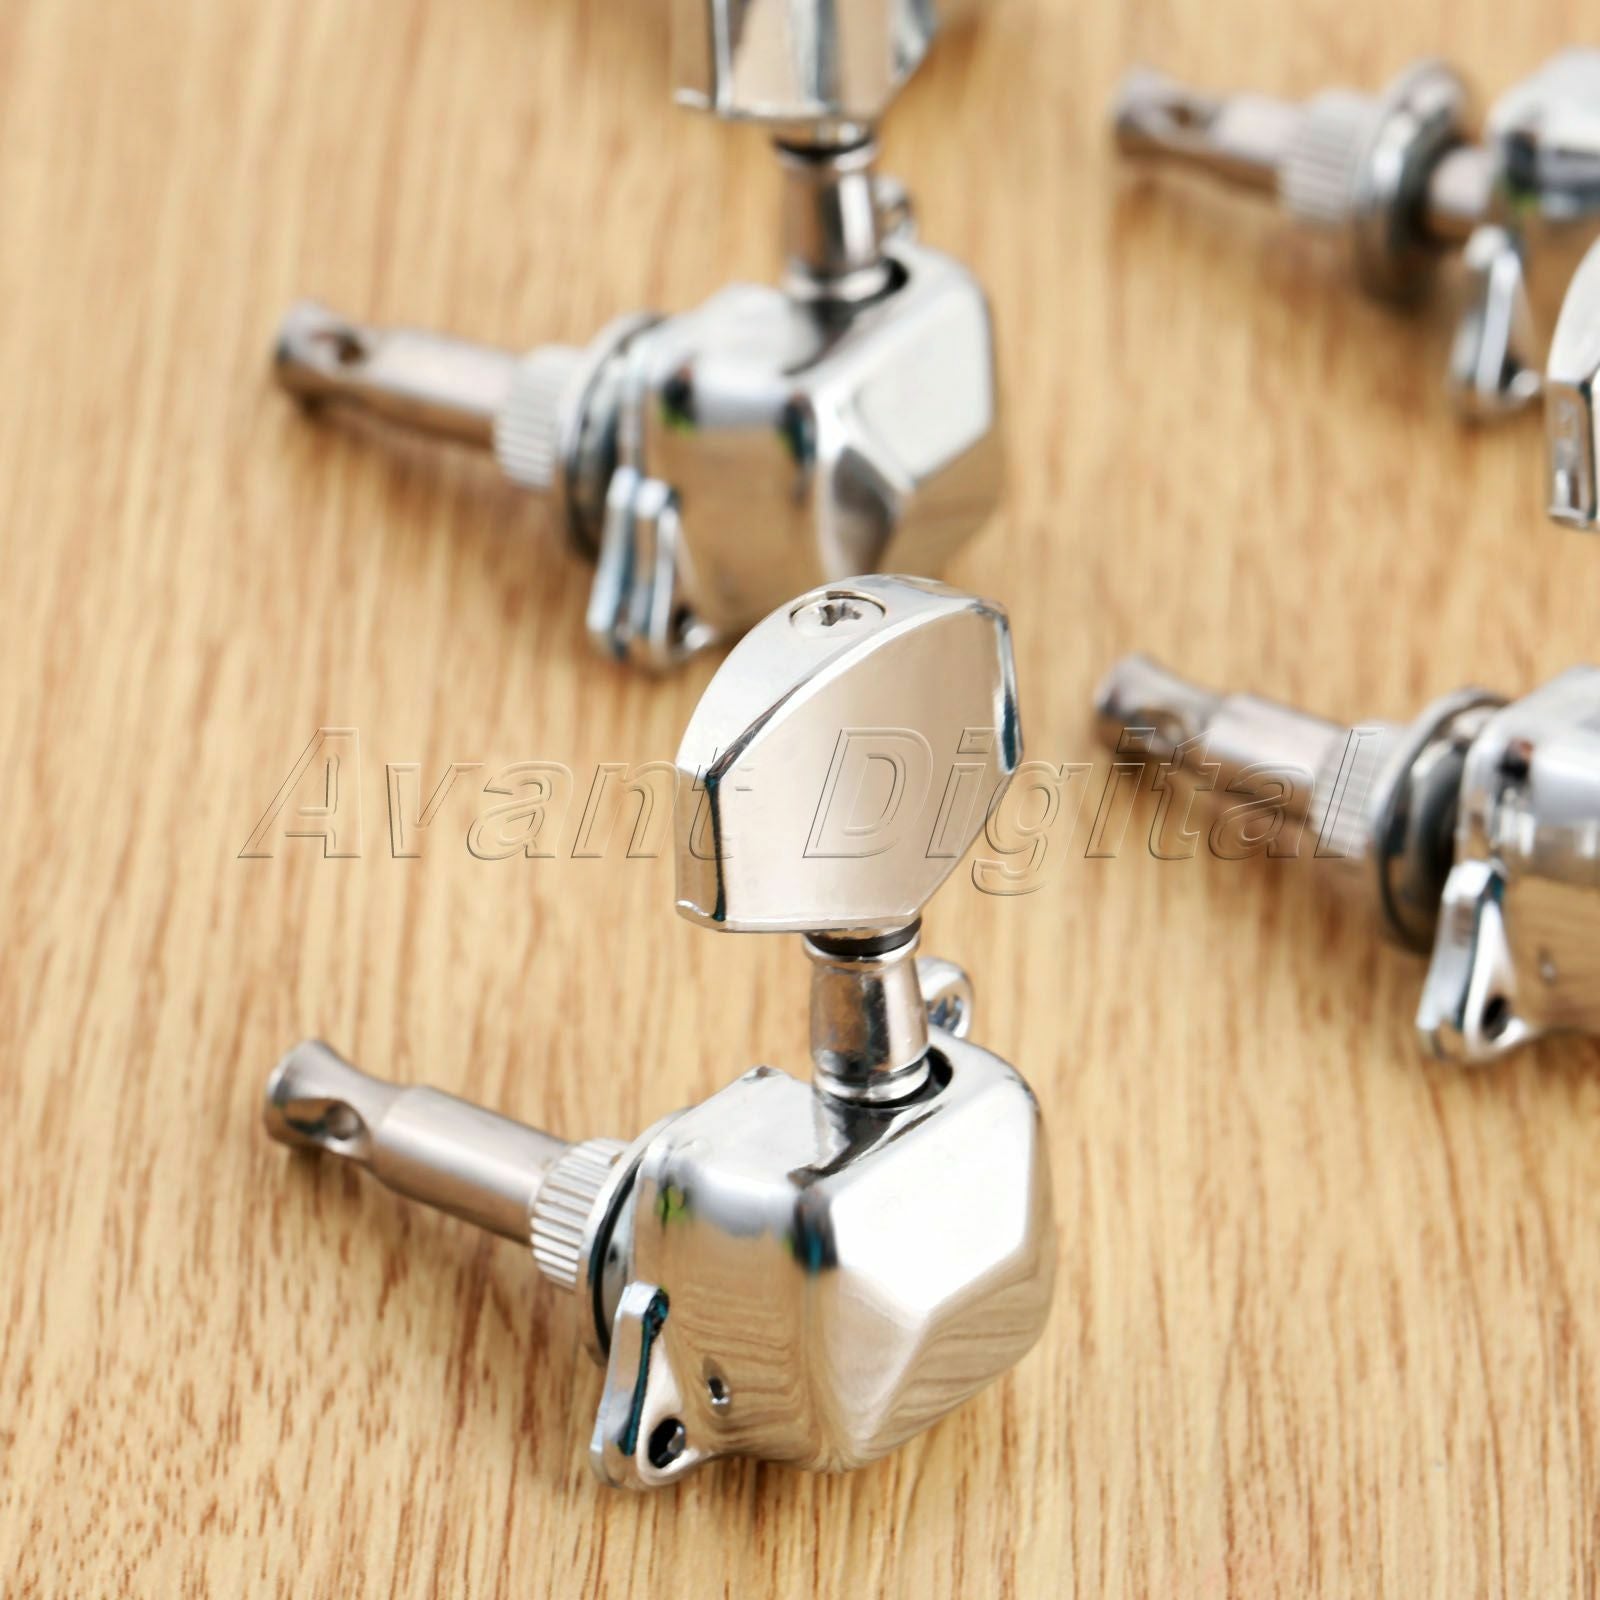 1Set Alloy Guitar Tuning Pegs keys Tuners Machine Heads For Electric Guitar